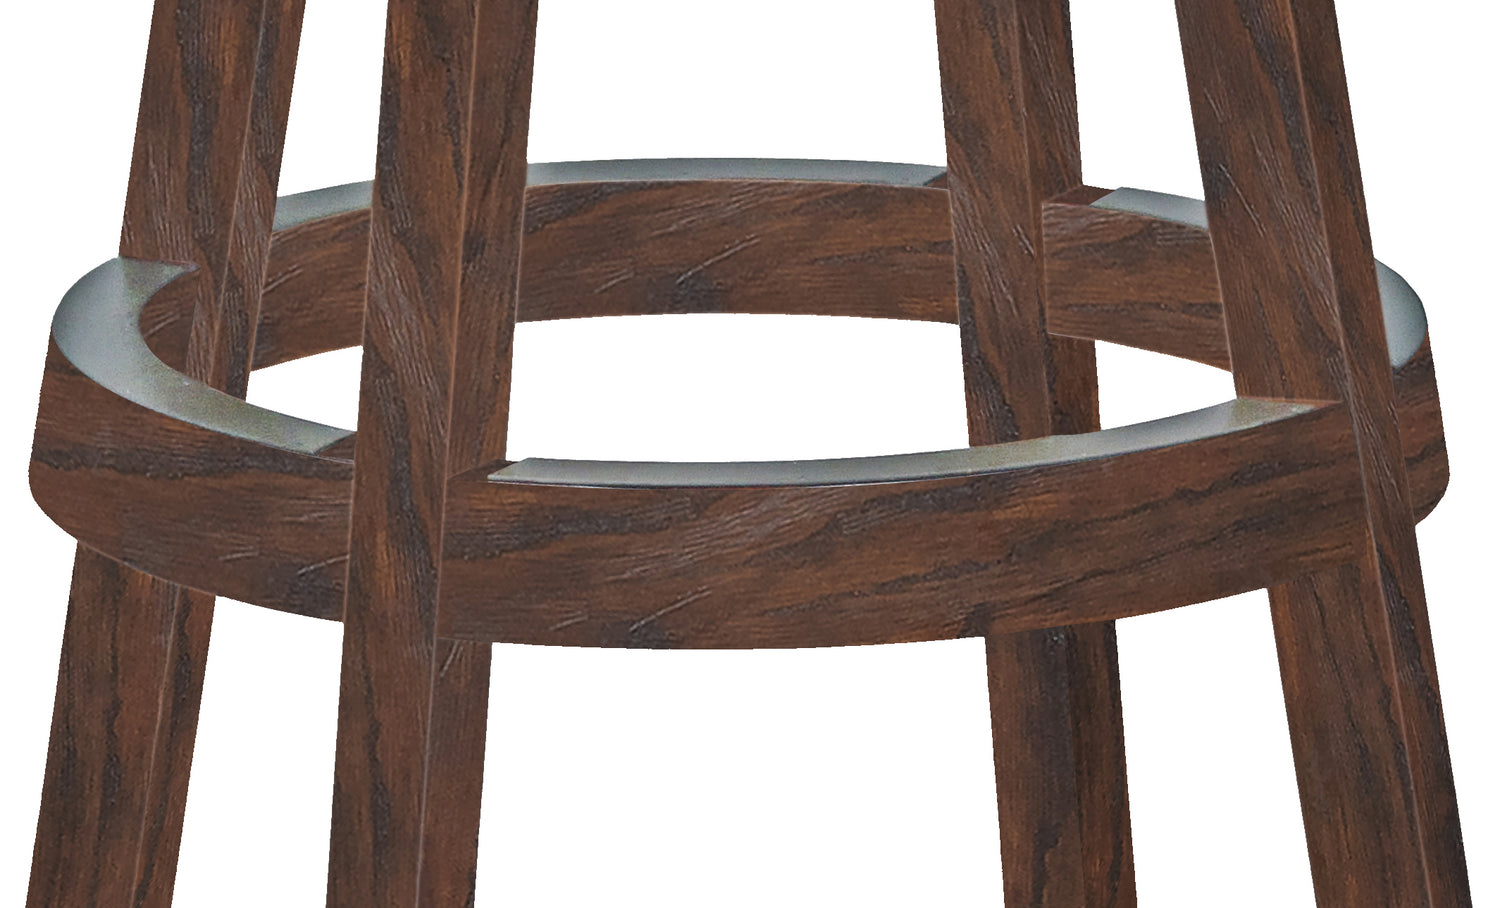 Legacy Billiards Classic Backless Barstool in Whiskey Barrel Finish - Footrest Closeup